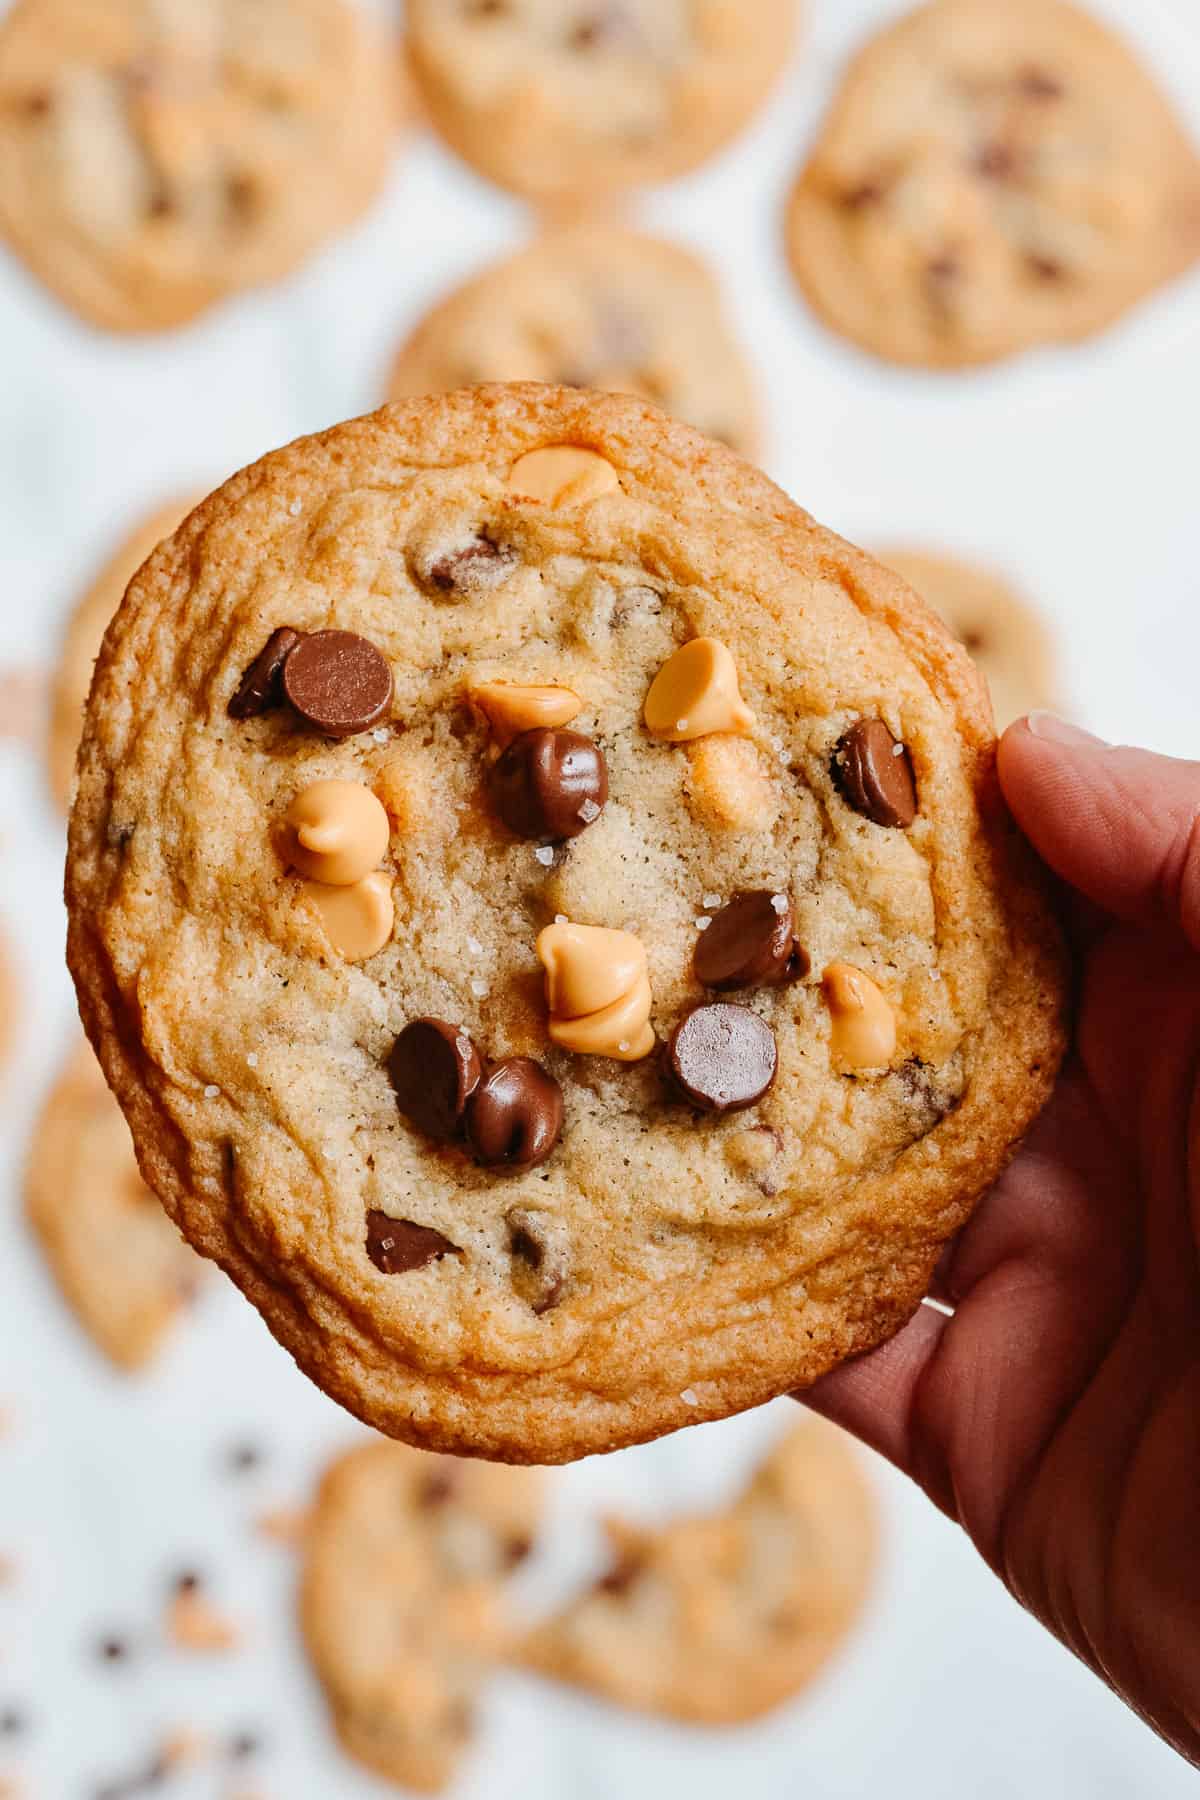 Hand holding a gluten free butterscotch chocolate chip cookie with more cookies in the background.